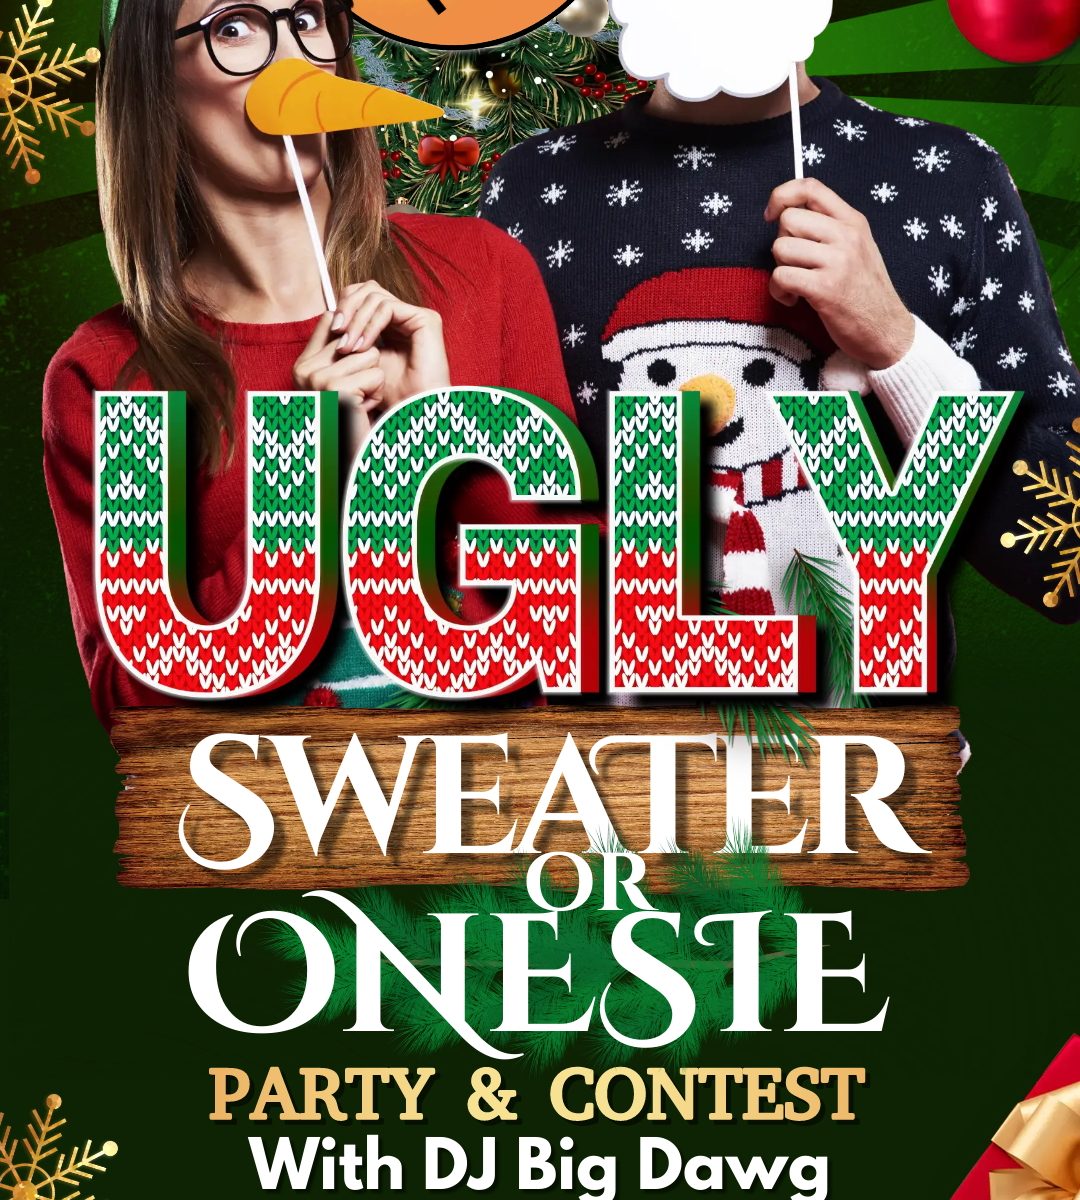 Ugly sweater contest and party at Amvets Post 147 in Haverhill Massachusetts